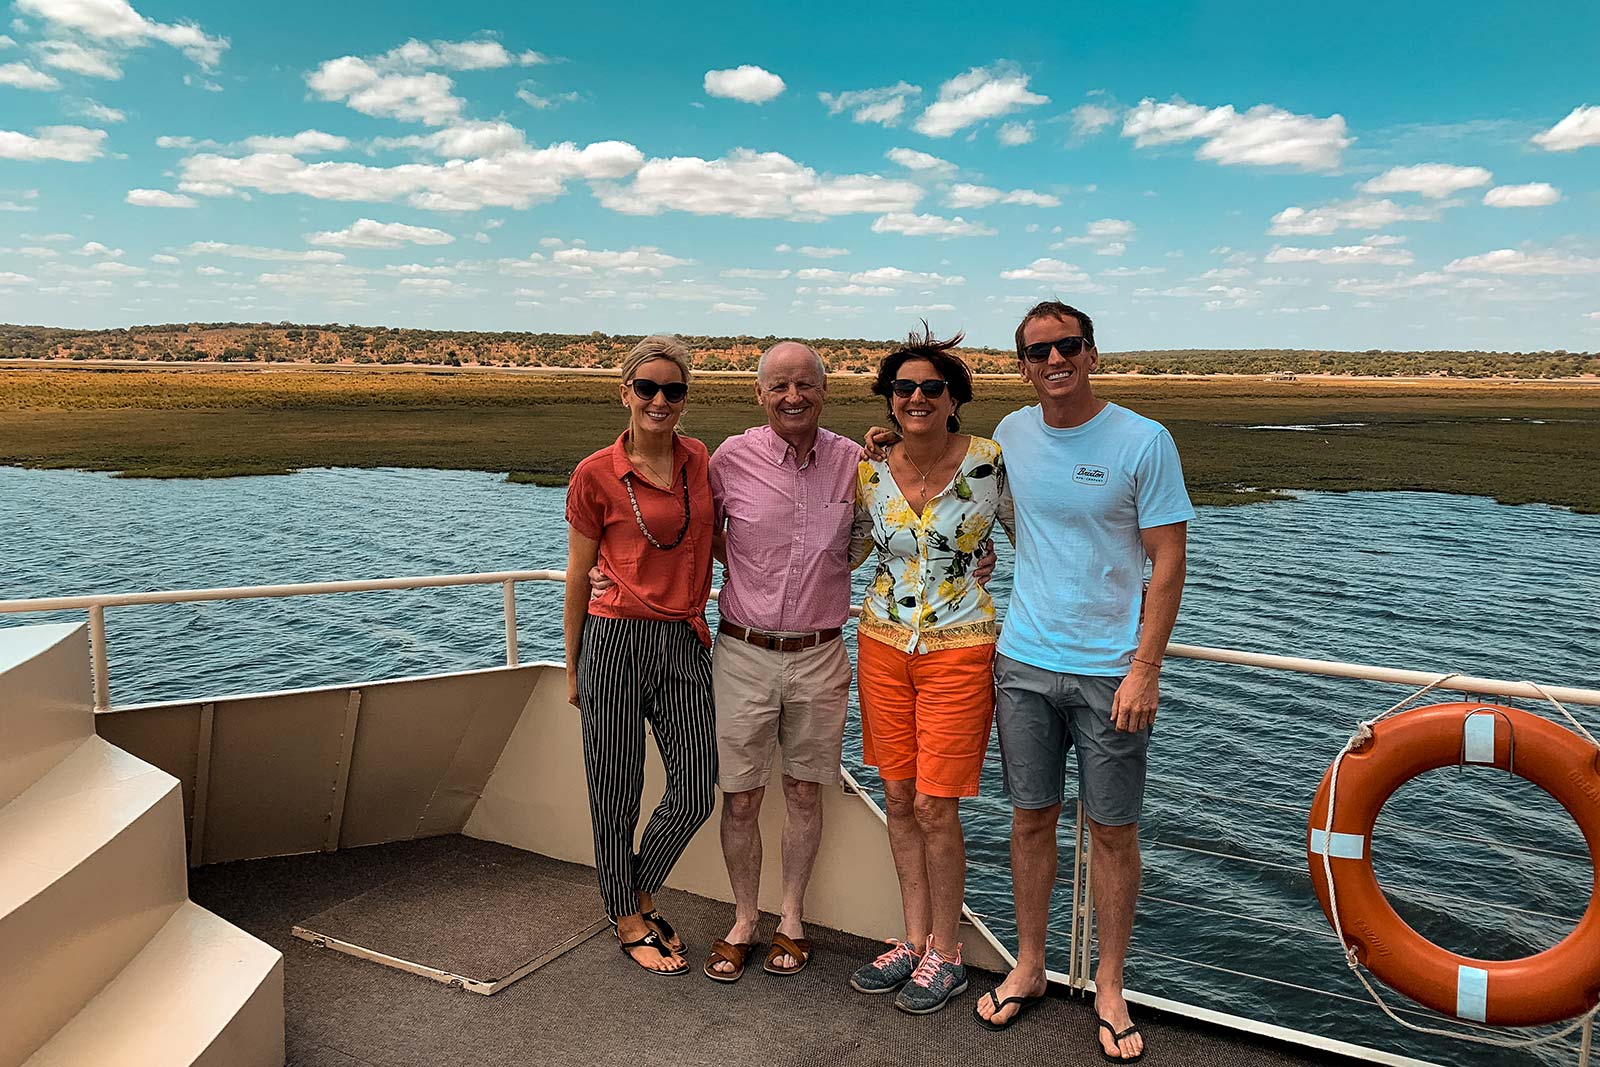 David Simpson and family at Zambezi Queen in Namibia, Africa. Kasenu Village, Namibia